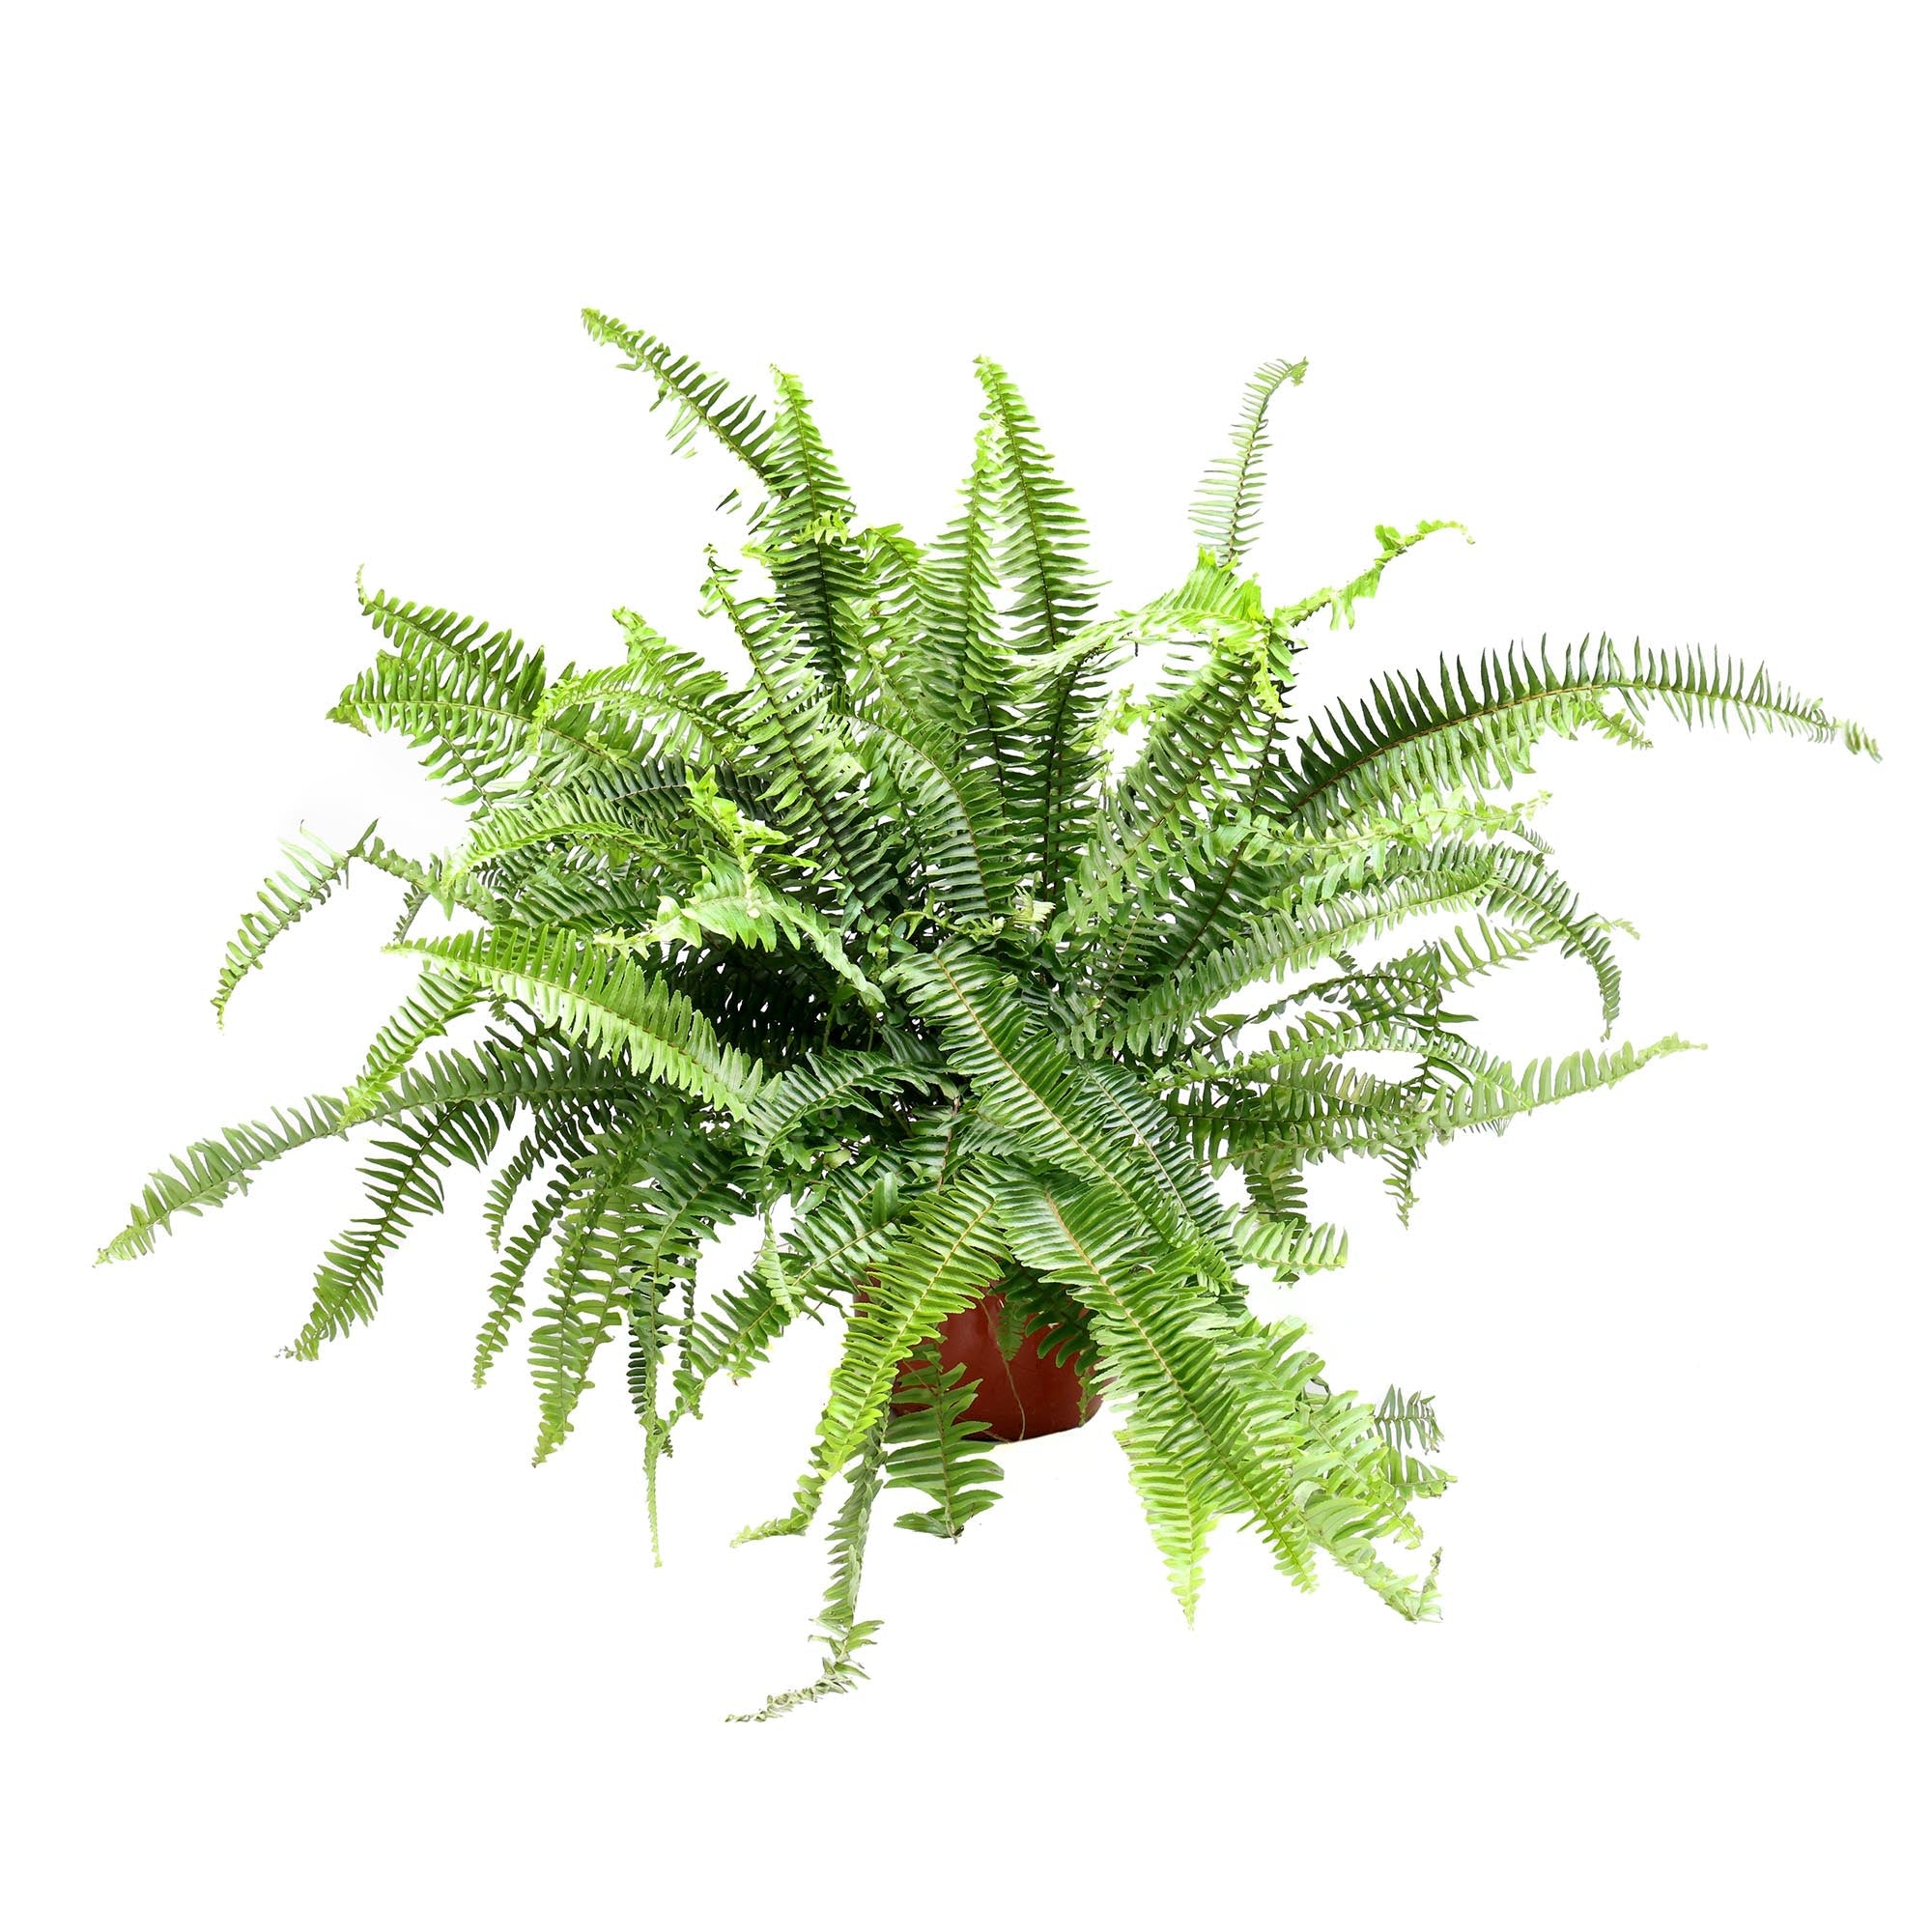 A lush Kimberly Queen Fern 8 Inch Pot with numerous green fronds extending outward, perfect for indoor gardening, potted in a simple, small red pot from Chive Studio 2024, displayed against a plain white background.